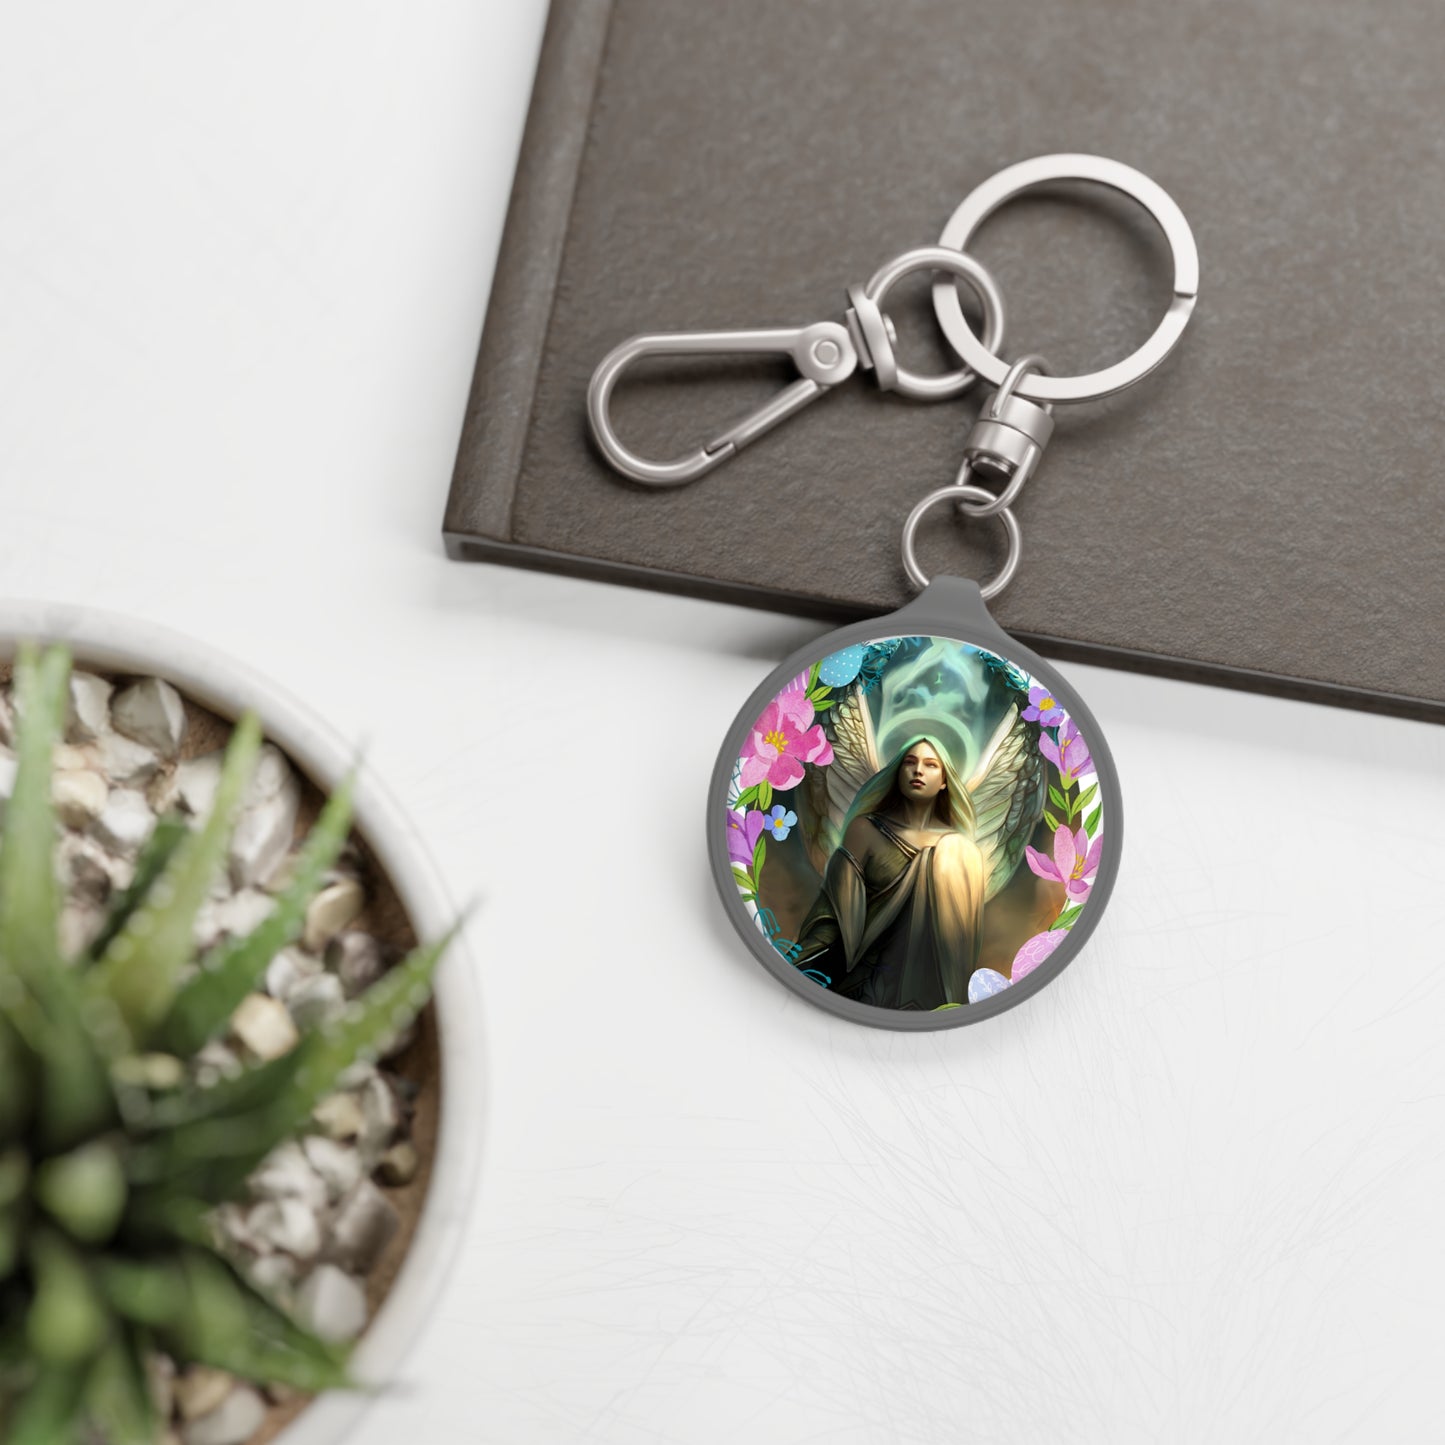 Experience Angelic Guidance with the Guardian Angel Damabiah Keyring